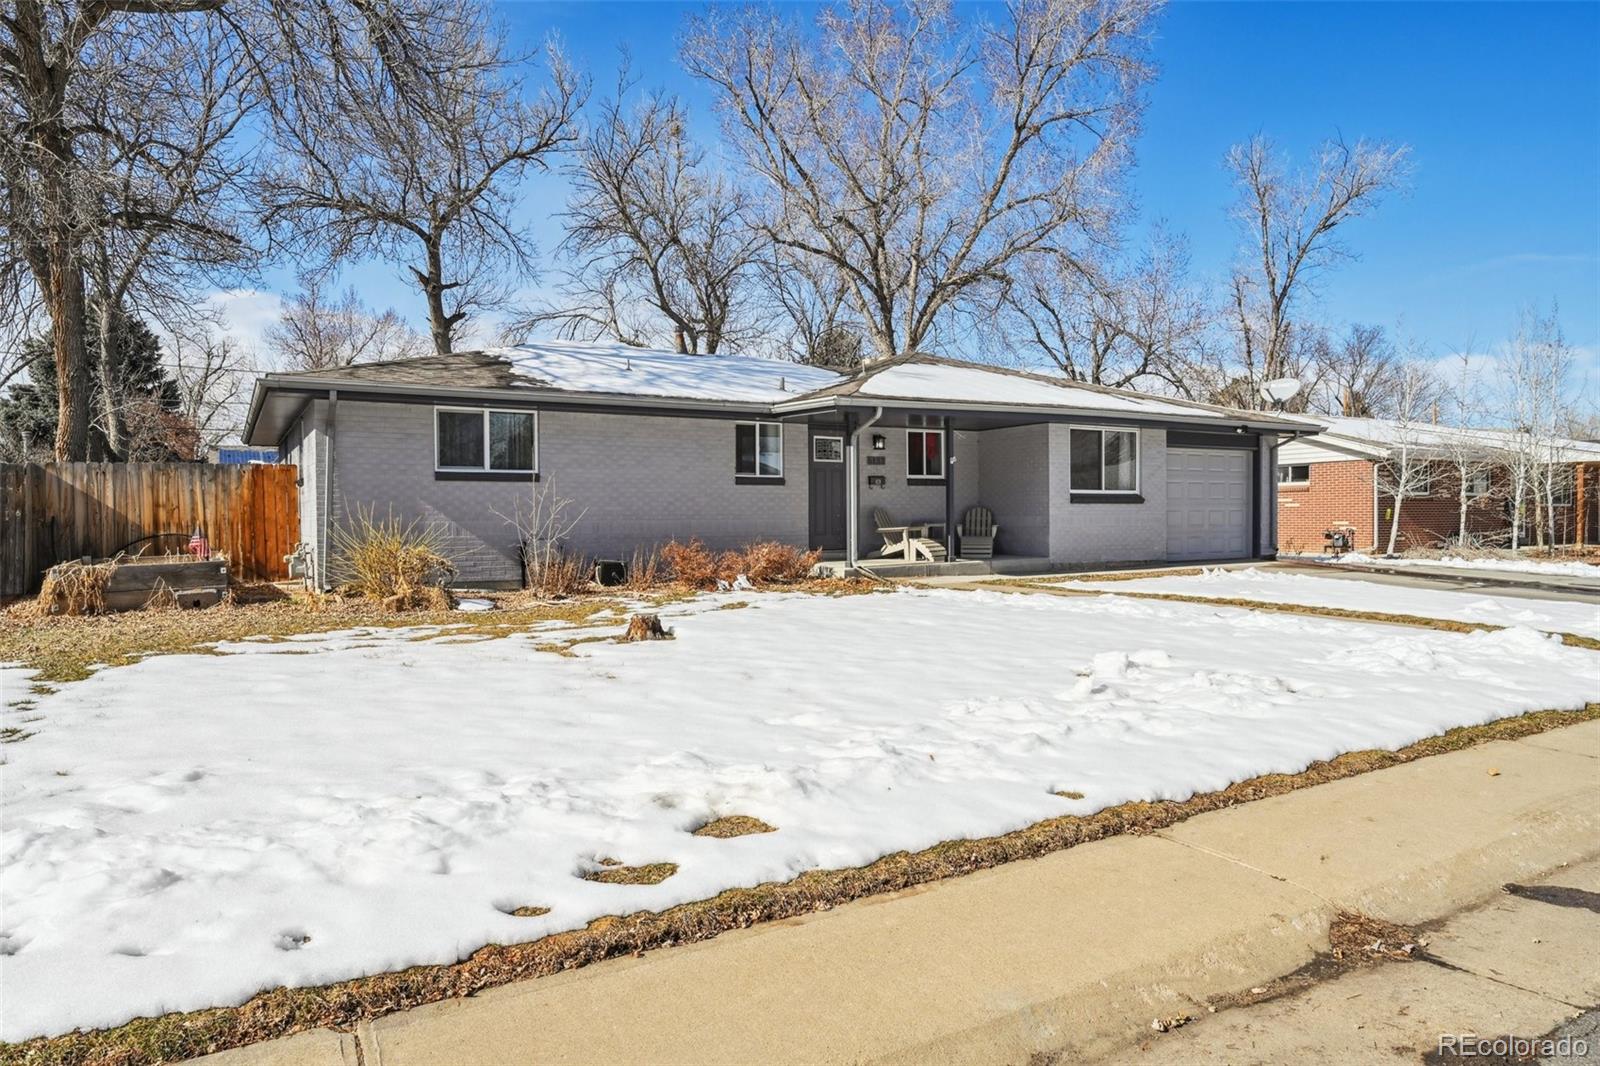 6133  lewis court, Arvada sold home. Closed on 2024-03-29 for $615,000.